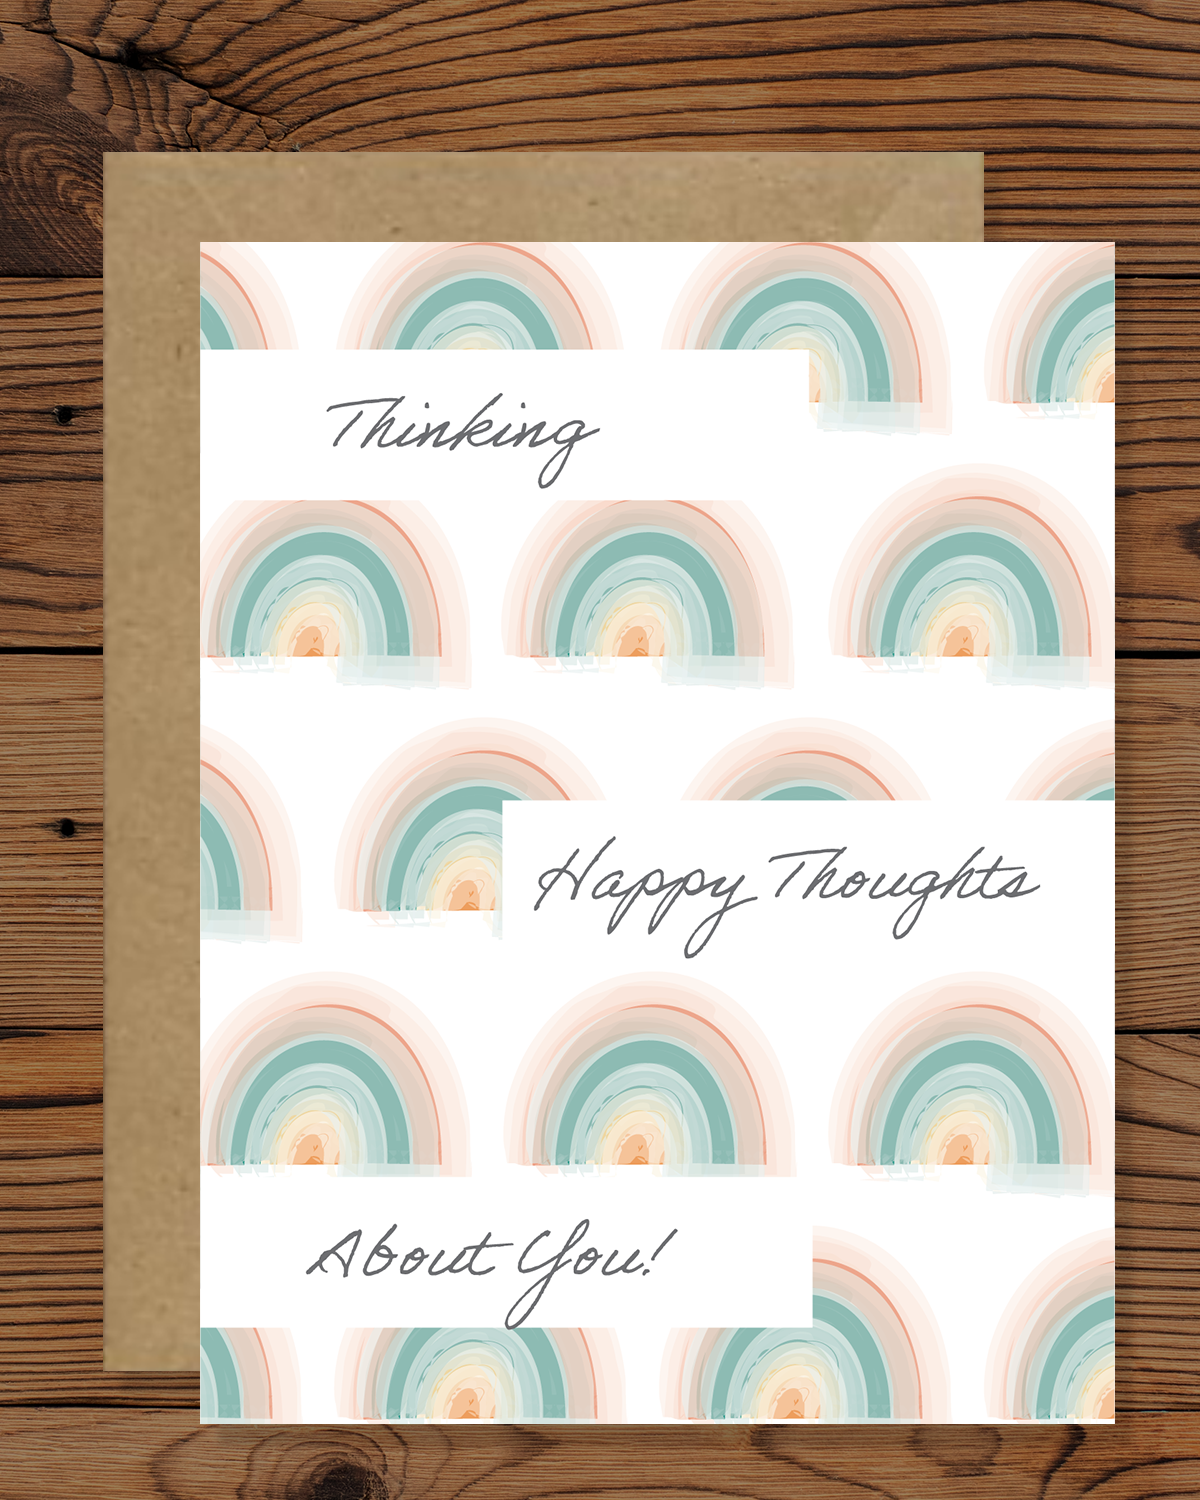 Thinking Happy Thoughts About You Greeting Card | Minimalist Rainbow Greeting Card | Rainbow Stationery